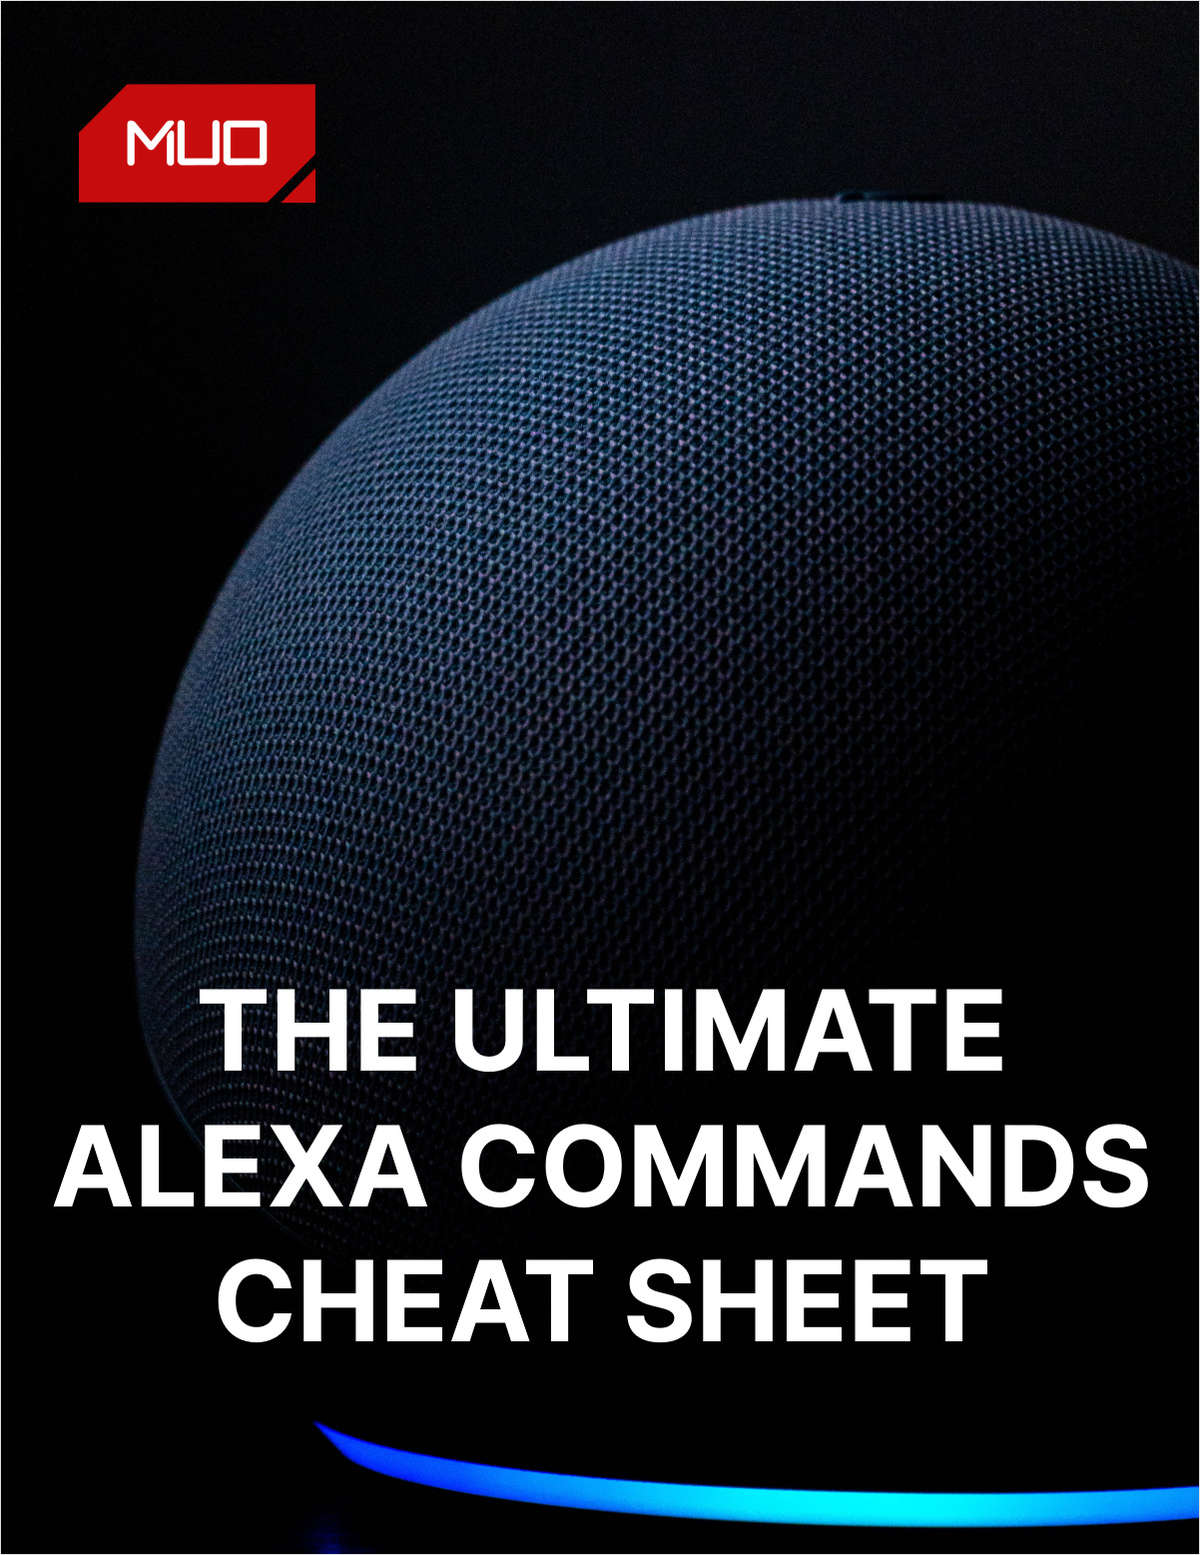 Every Command You Can Say to Your Amazon Alexa Free MakeUseOf Cheat Sheet